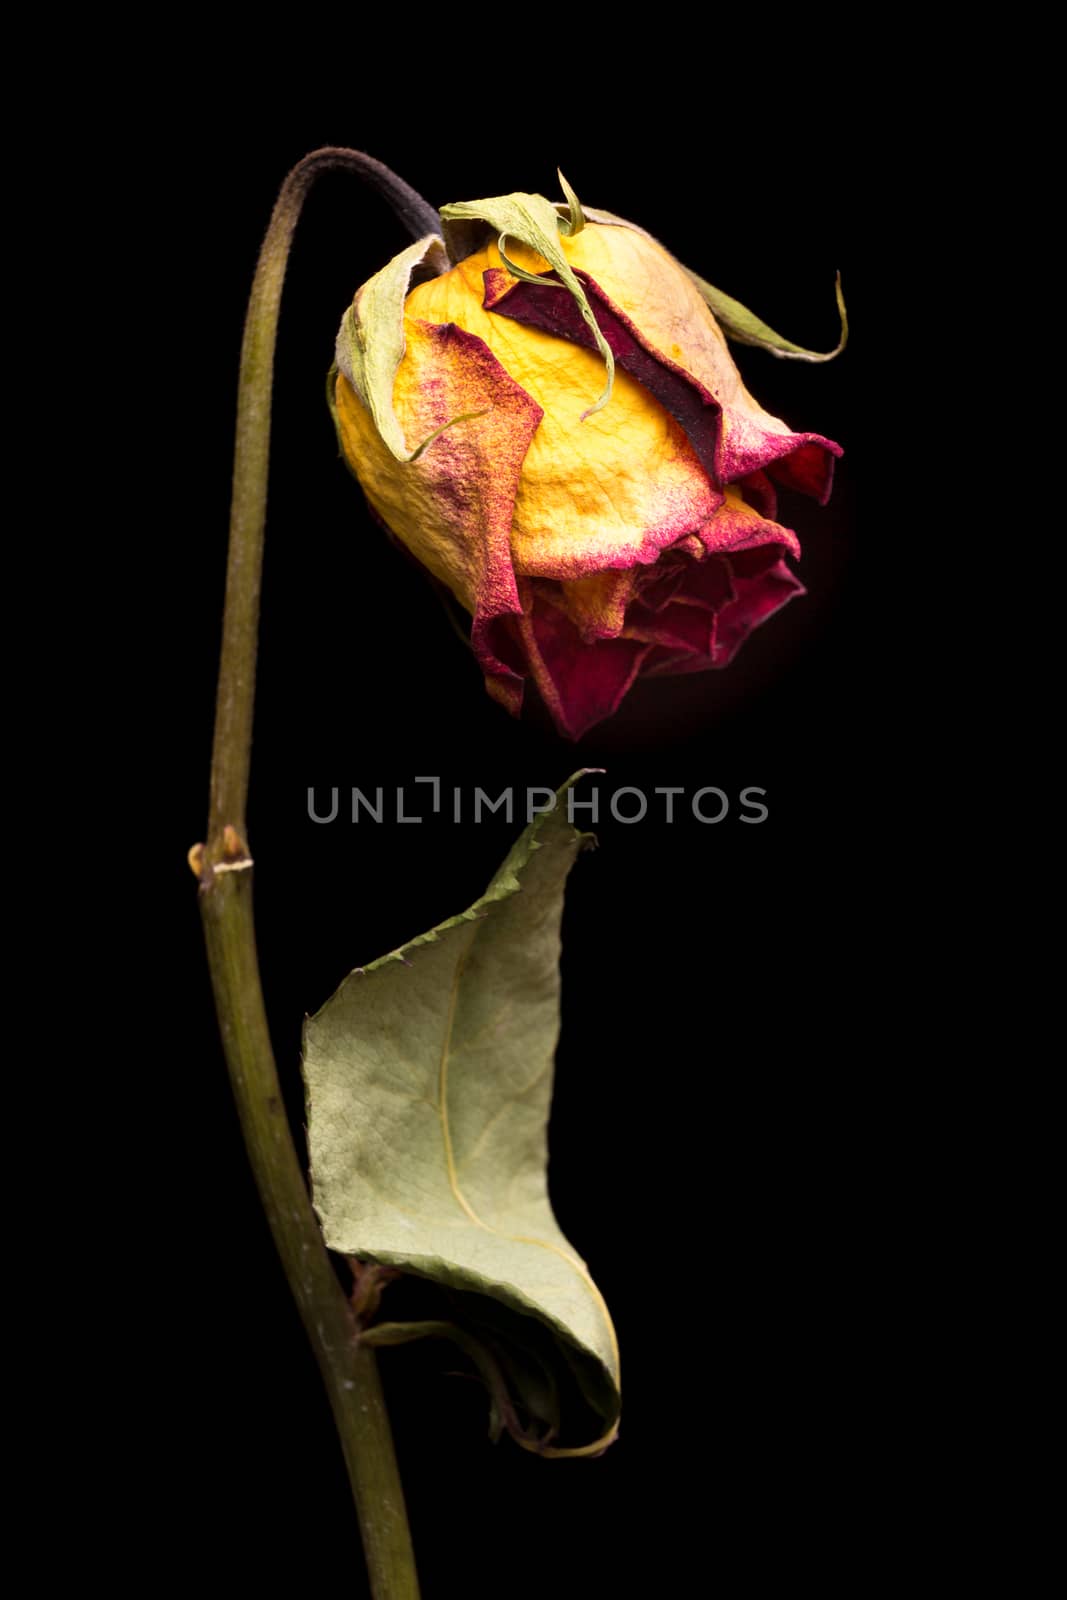 A drying and aging beautiful yellow rose with red edged petals